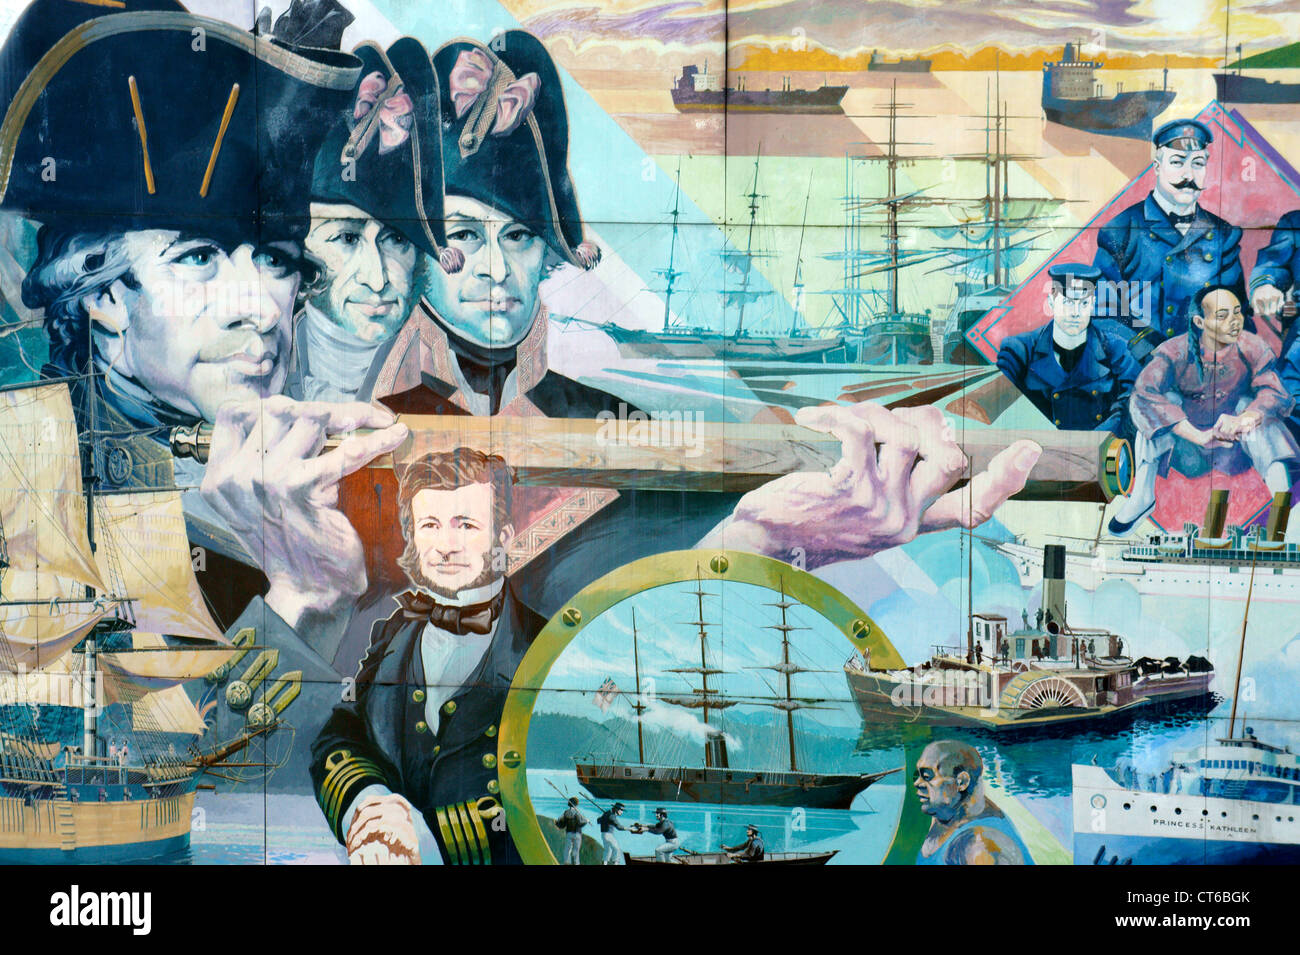 Detail of mural by Frank Lewis depicting the maritime history of Vancouver, Vancouver Maritime Museum, Hadden Park, Vancouver, BC, Canada Stock Photo